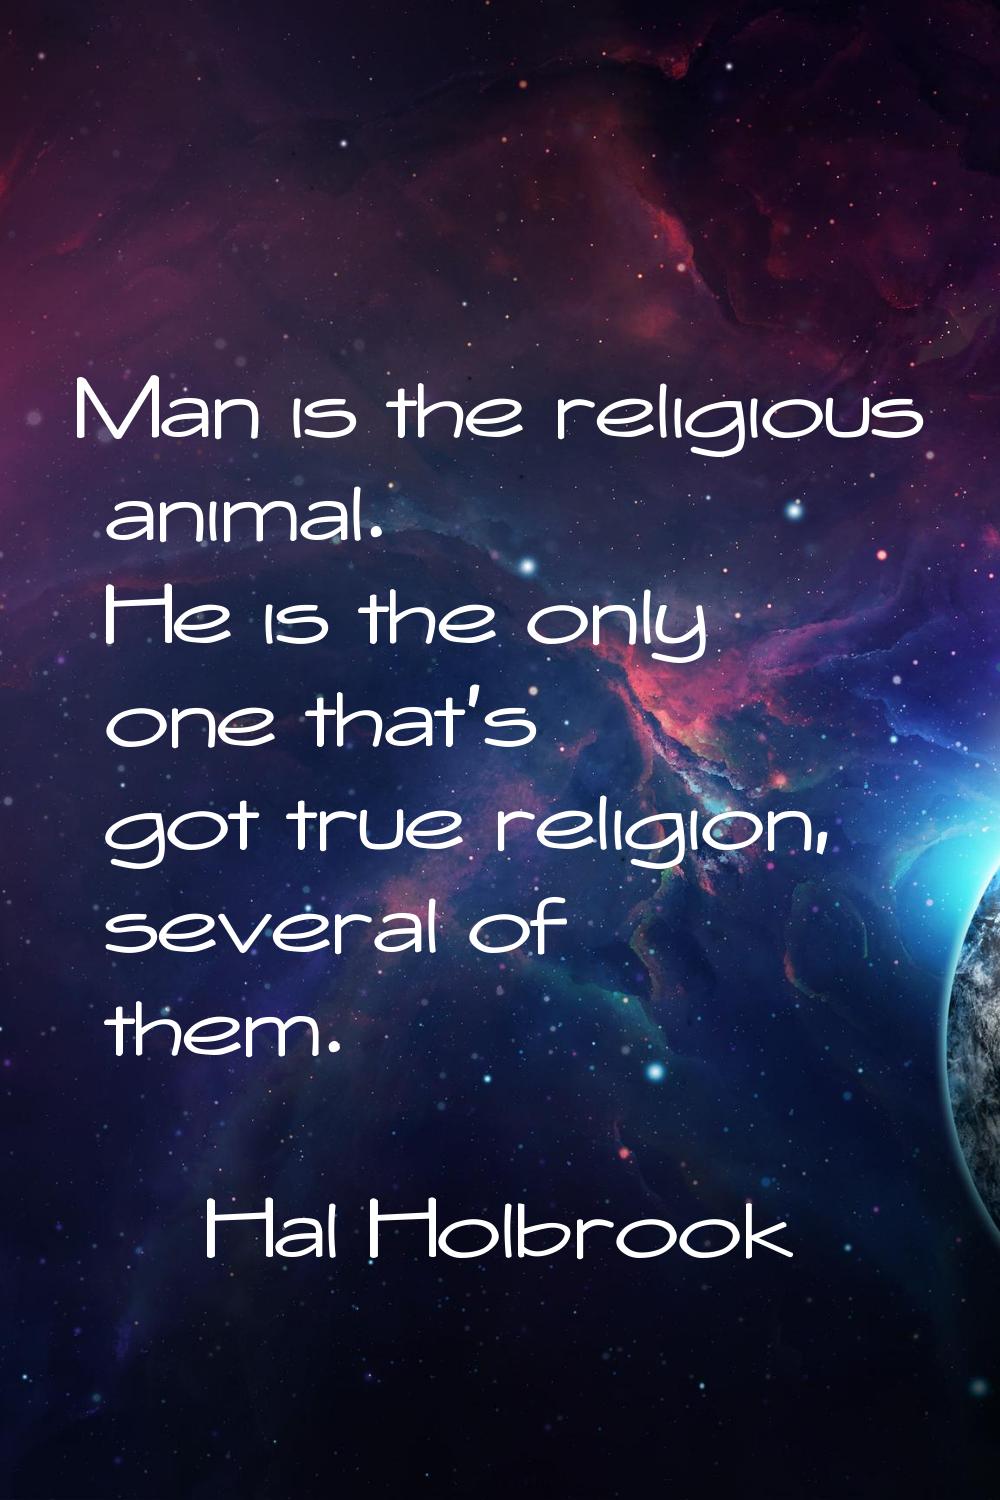 Man is the religious animal. He is the only one that's got true religion, several of them.